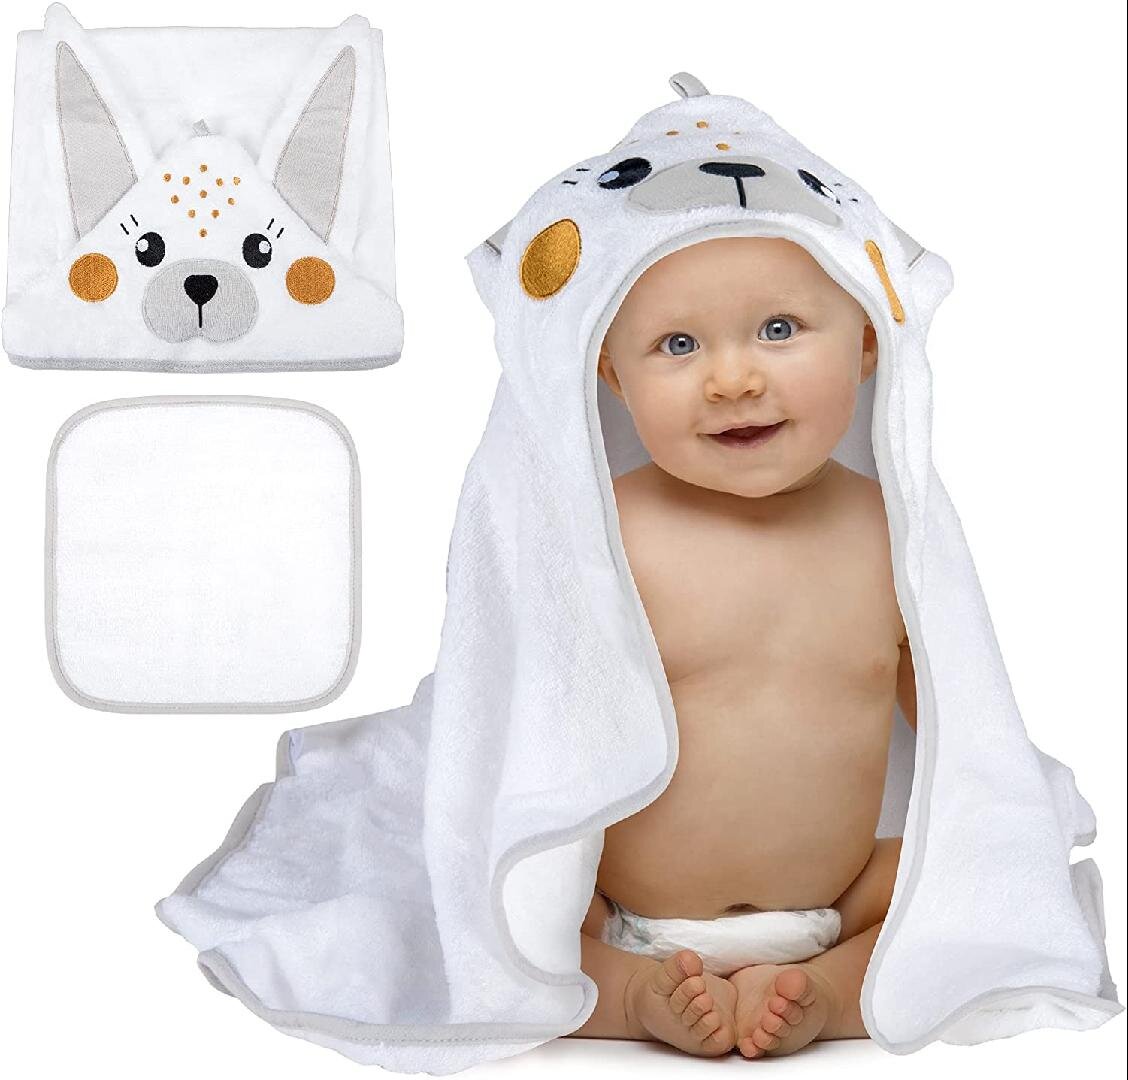 Extra Soft Bamboo Hooded Baby Blanket Towel Washcloth Set for Infant Toddler 